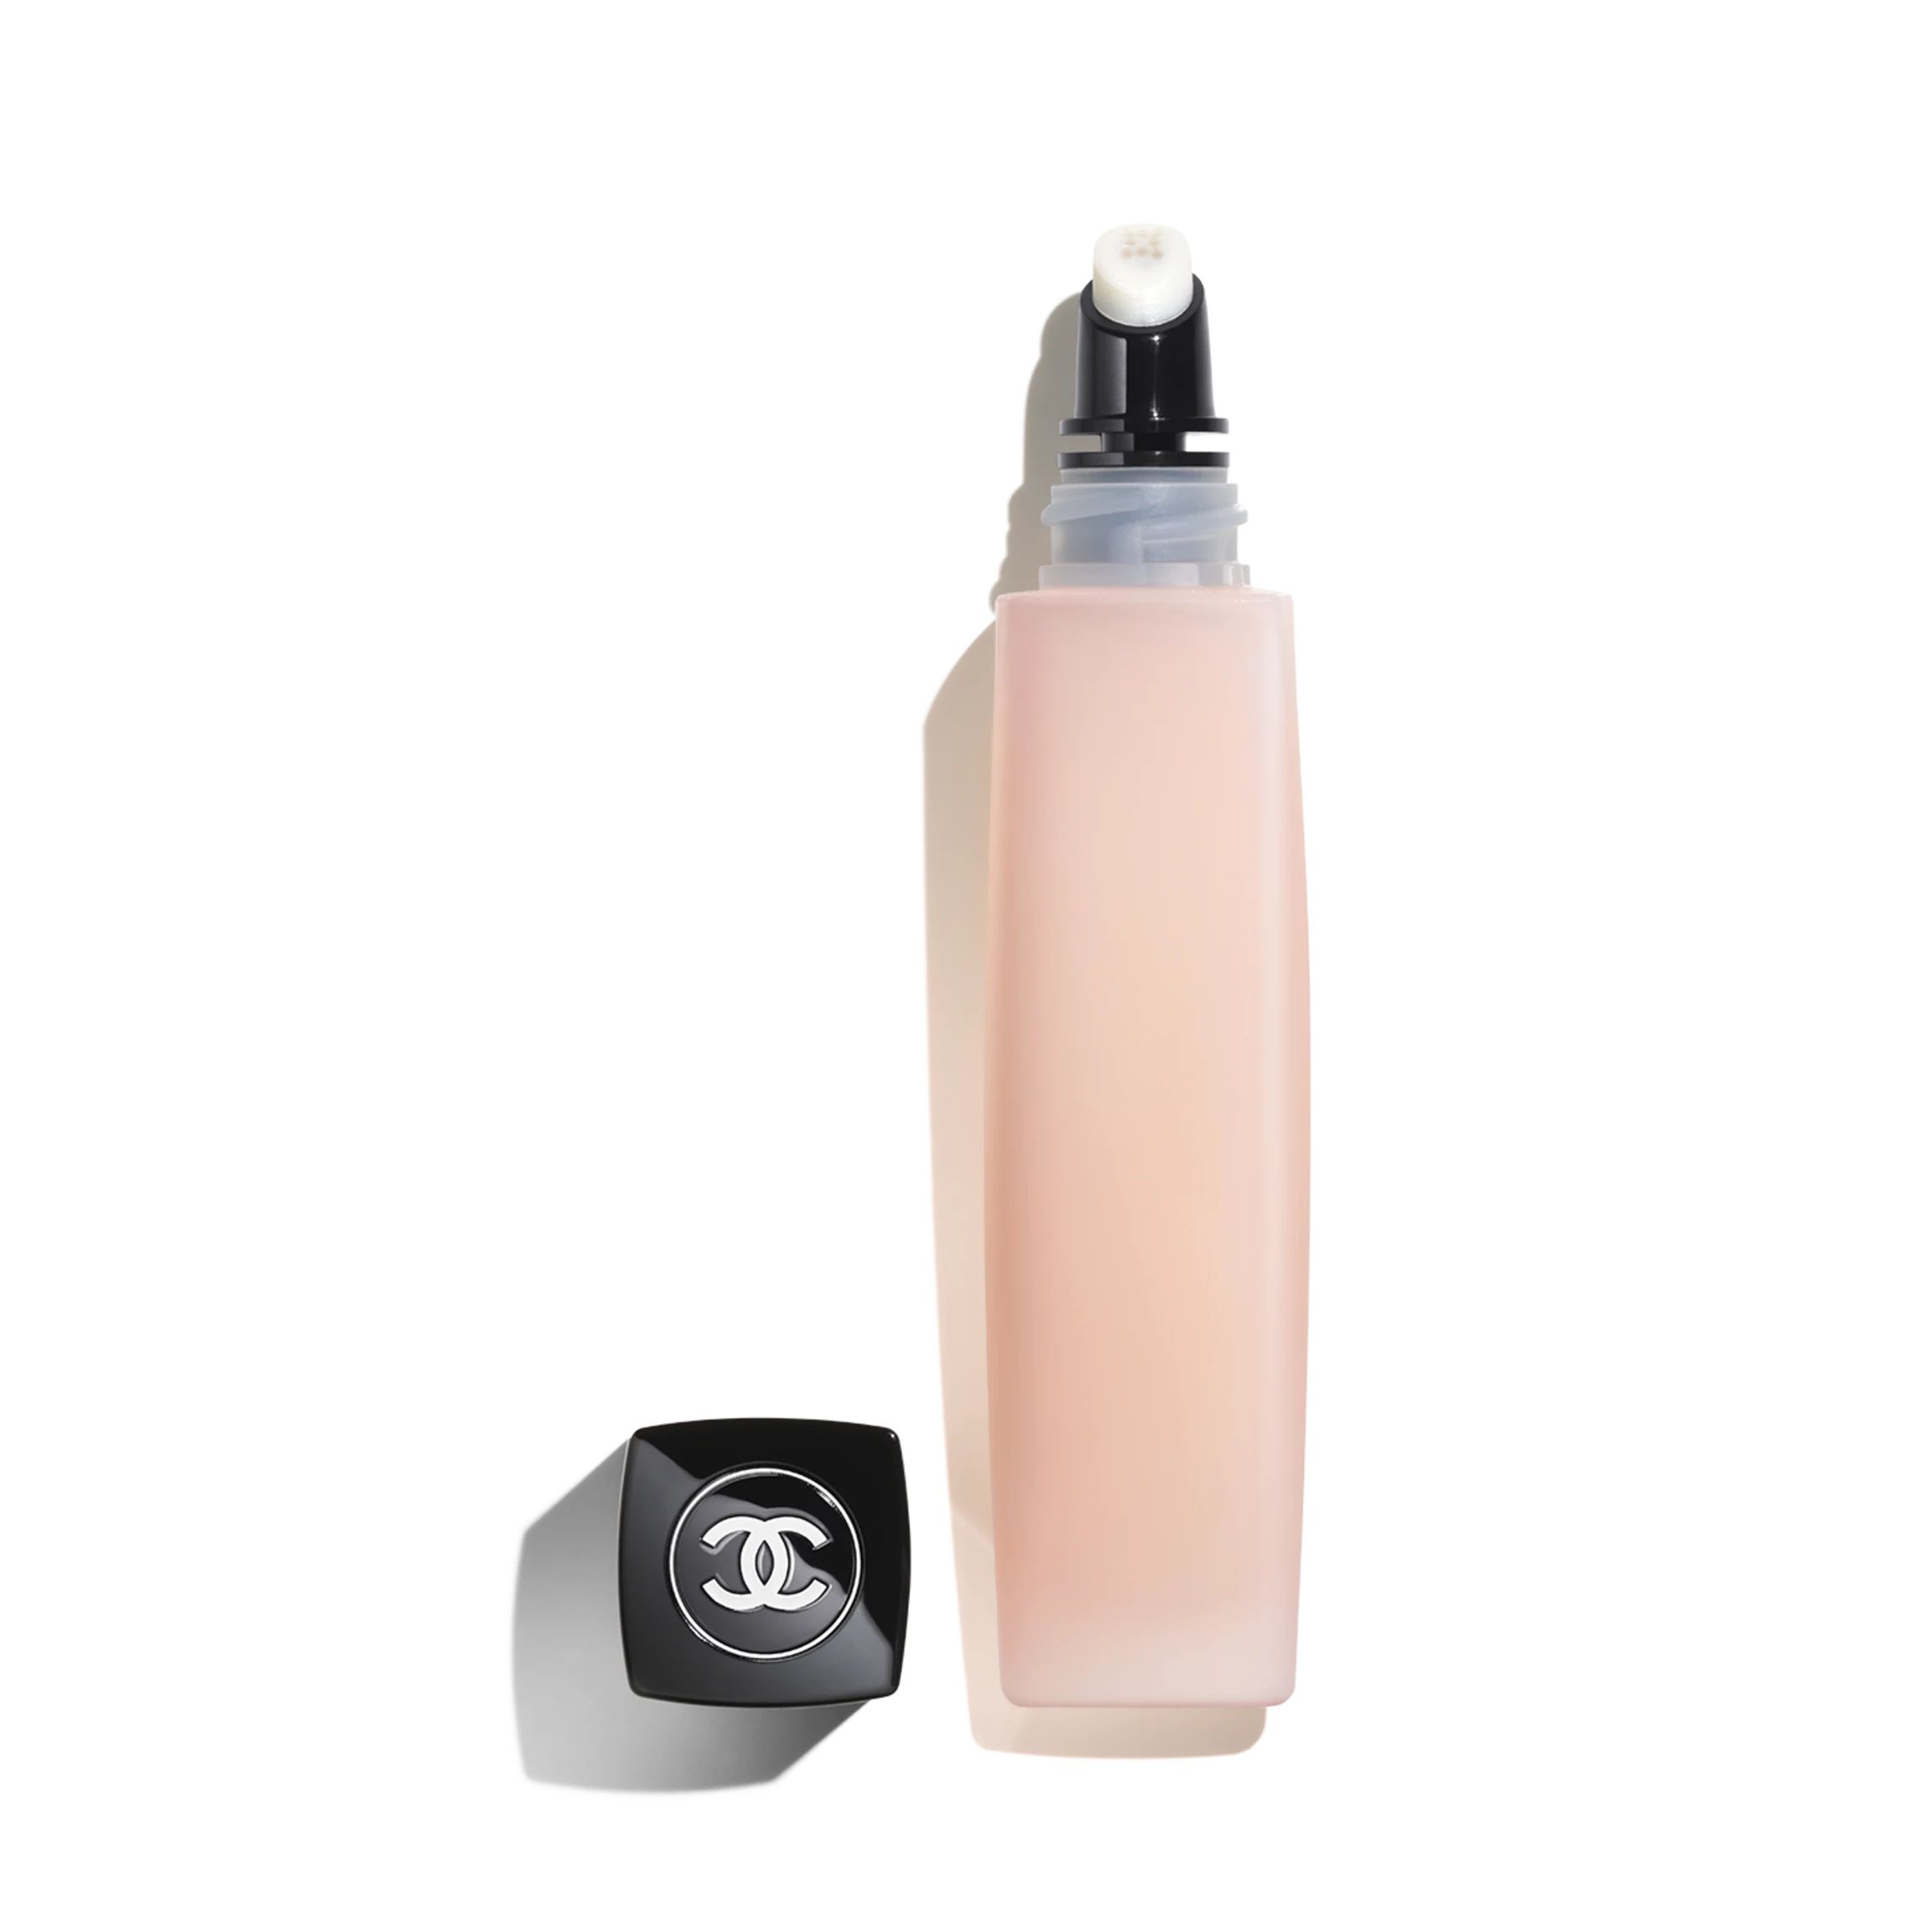 L'HUILE CAMÉLIA Hydrating and fortifying oil  | CHANEL | Chanel, Inc. (US)